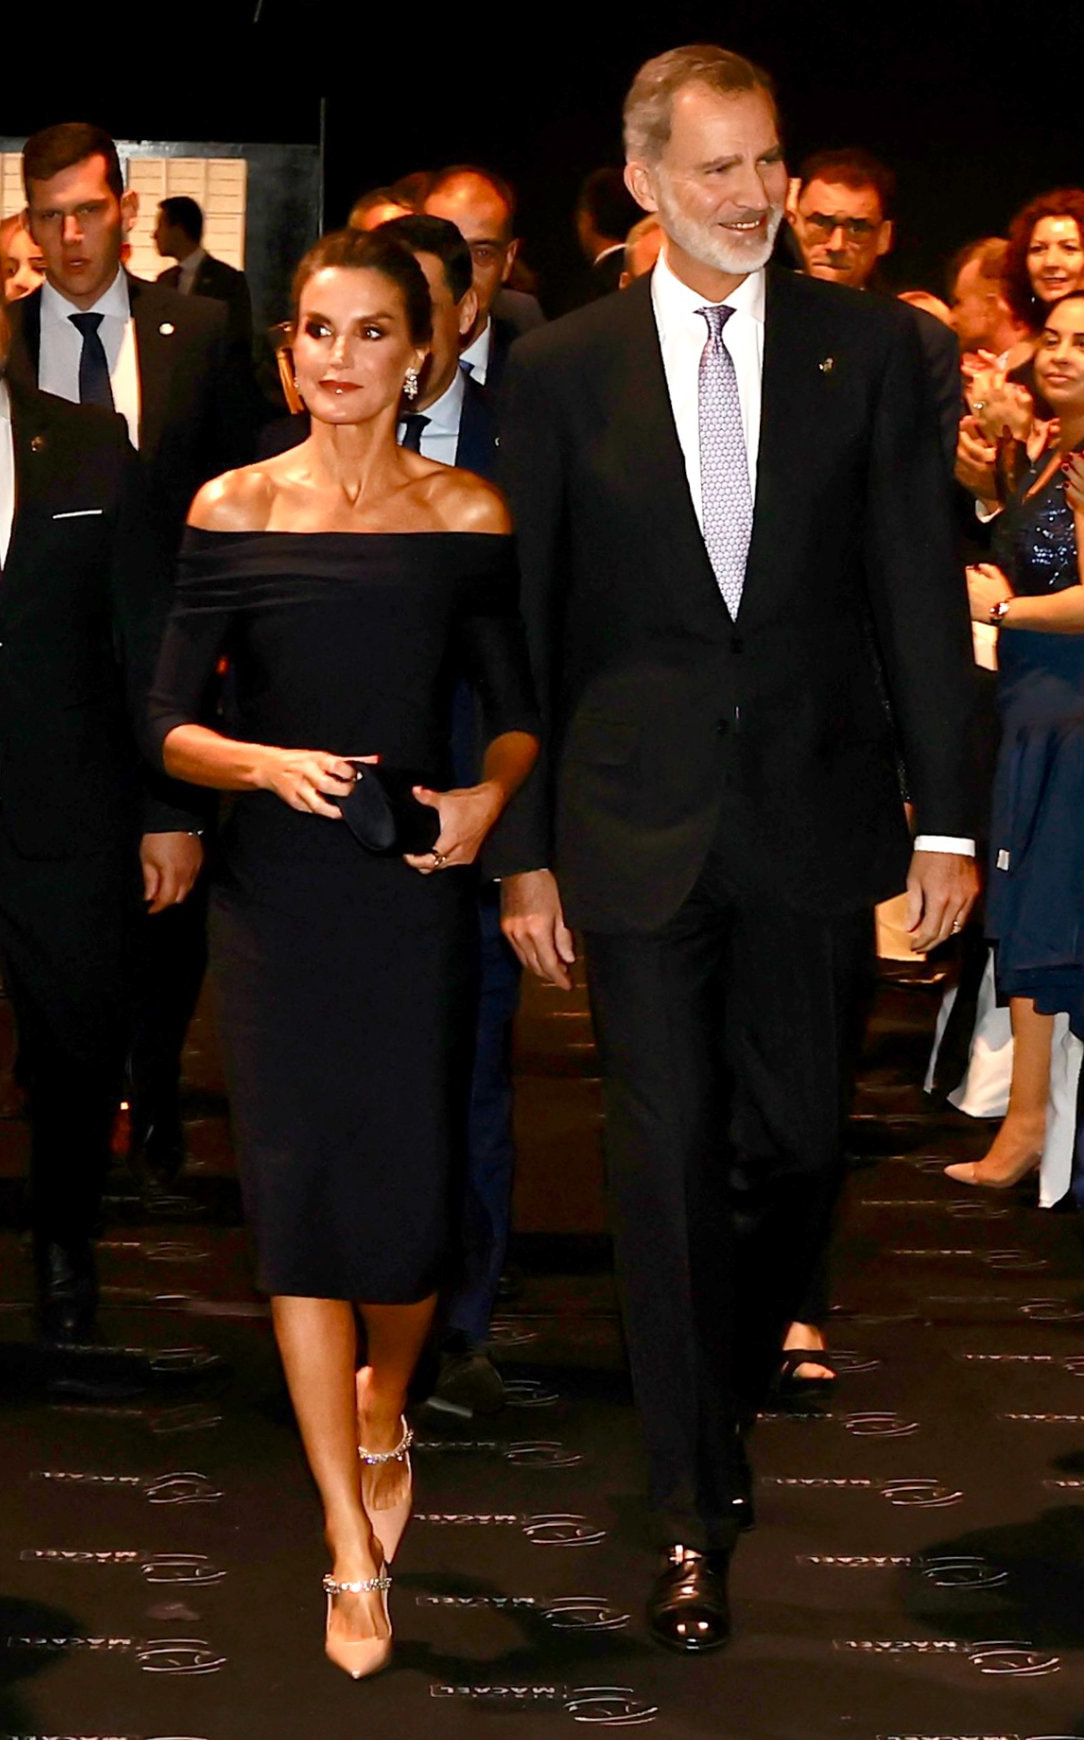 King Felipe VI and Queen Letizia attended the XXXV edition of the 